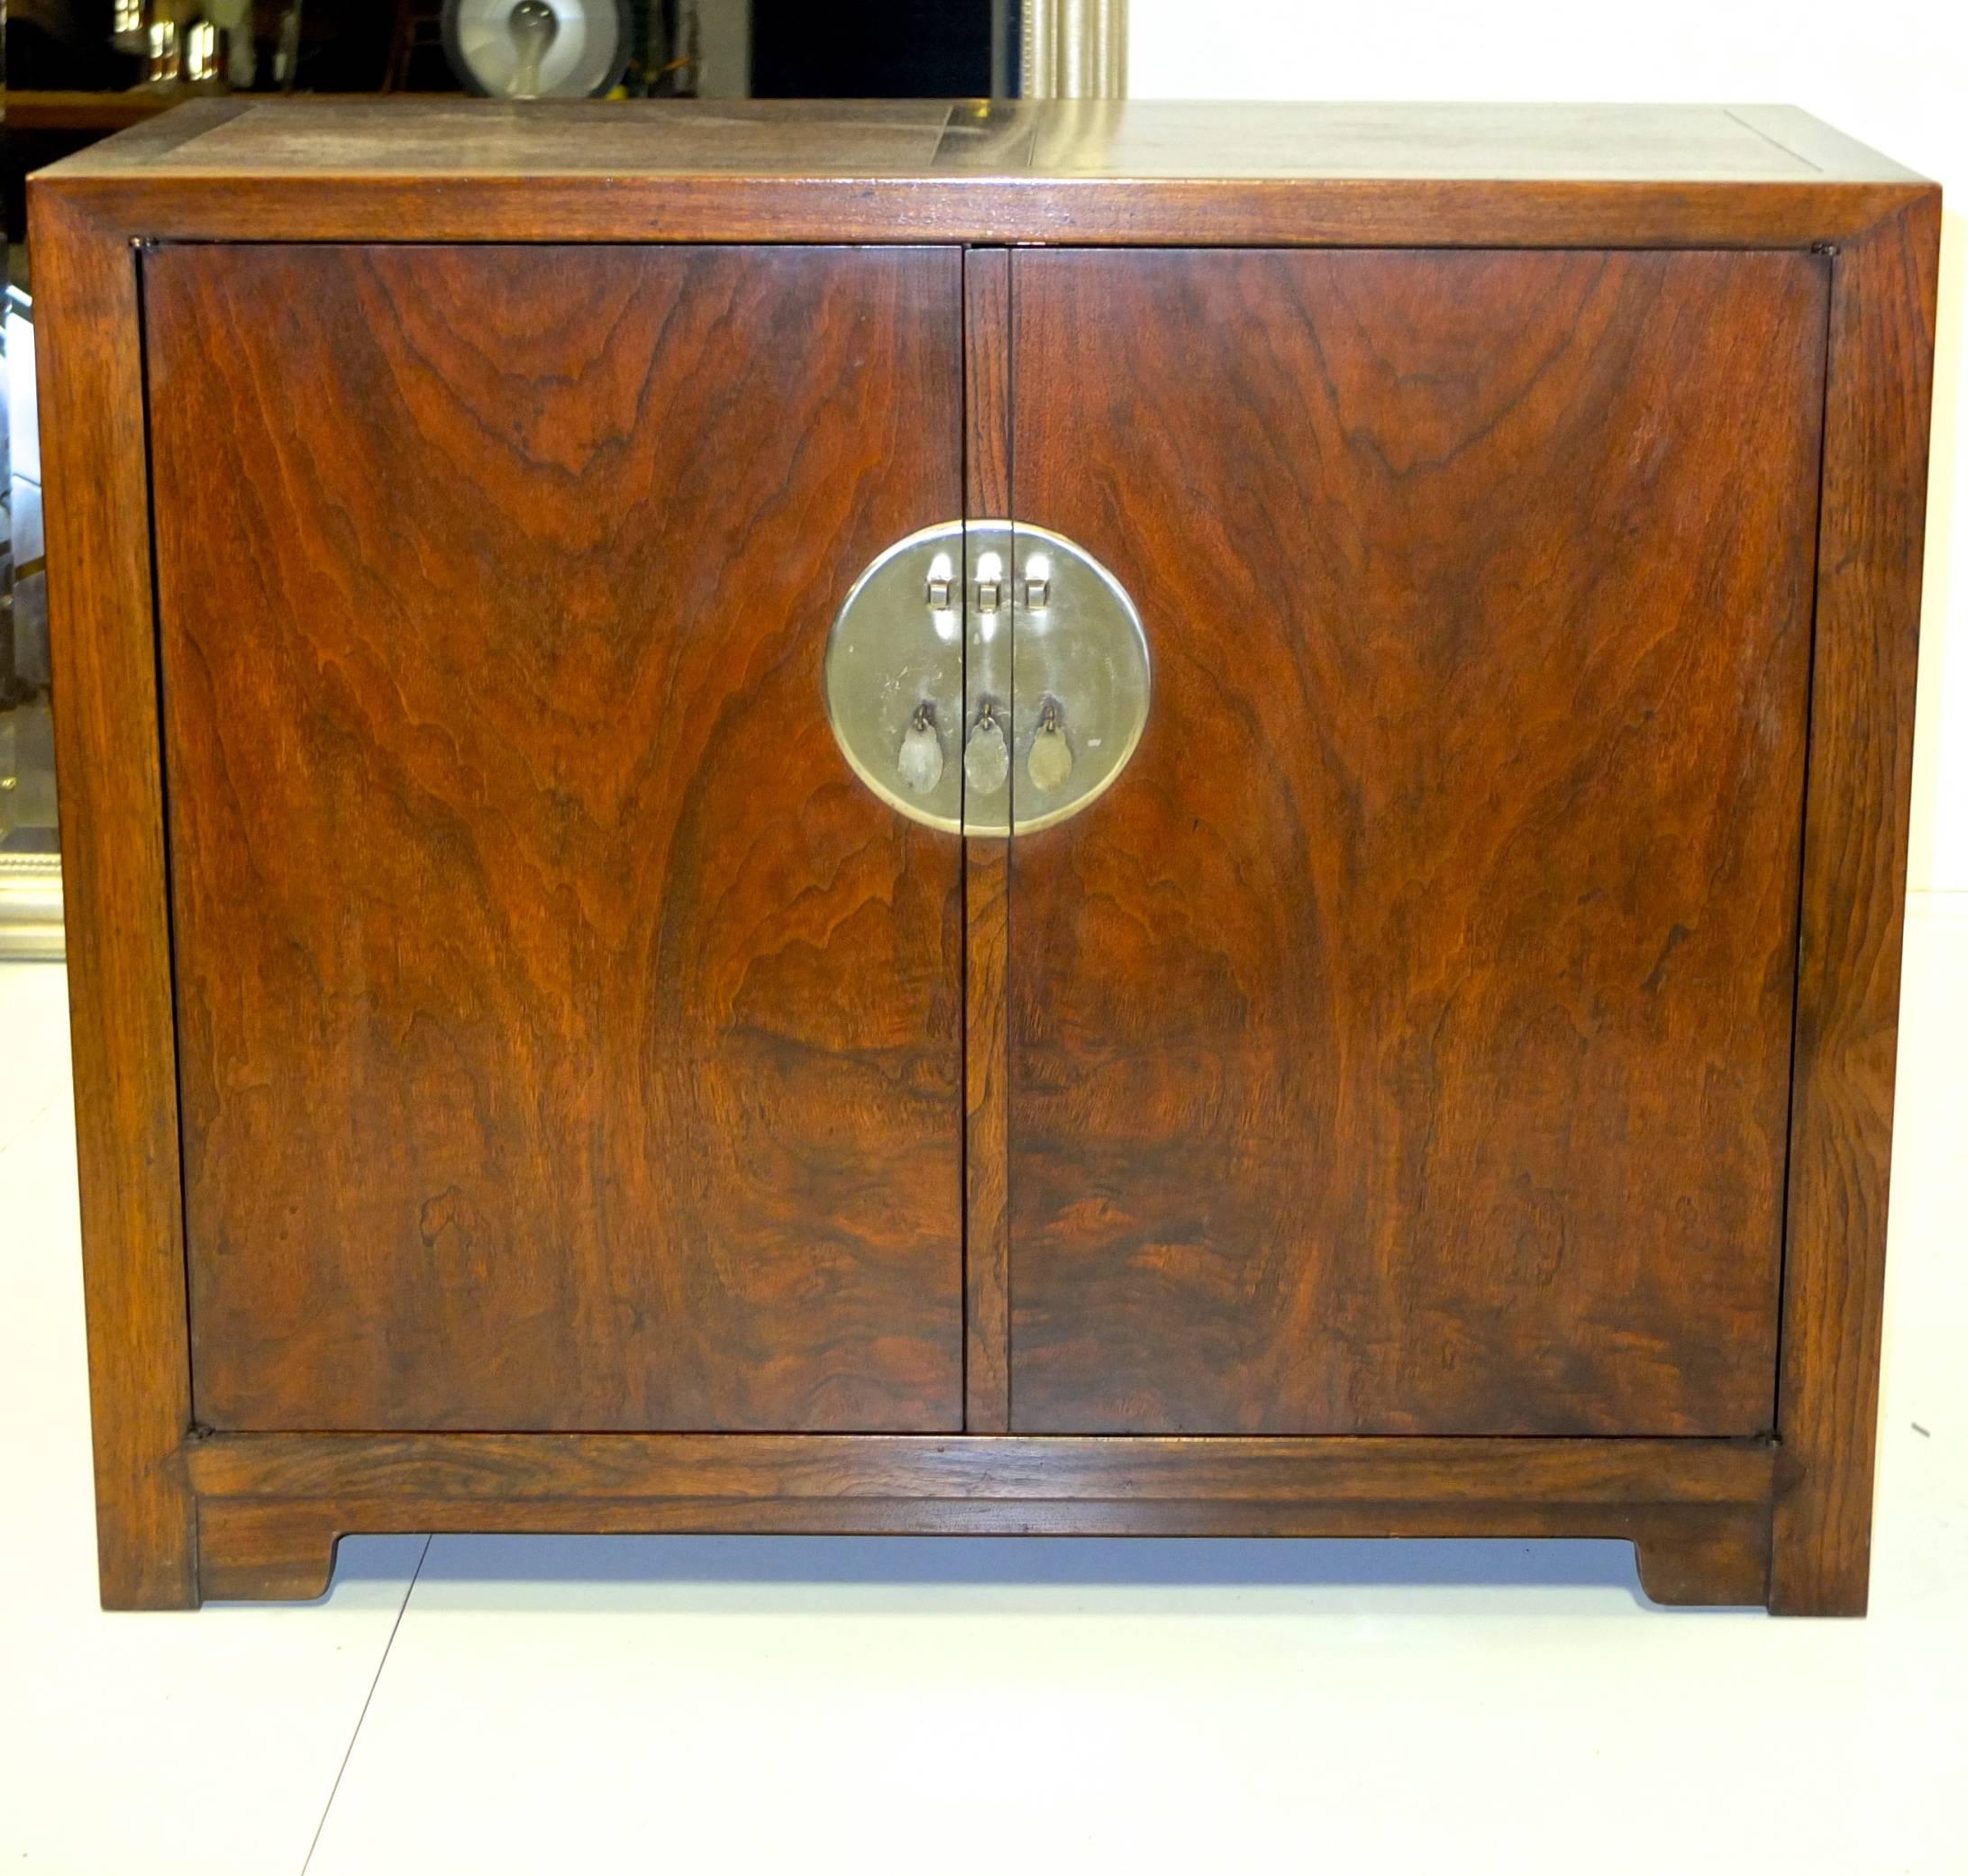 Walnut two-door cabinet with distinctive nickel hardware from Baker's Far East Collection designed by Michael Taylor (see image 10 for original Baker catalog page). First produced in 1949 and continued through the early 1960s. Classic modern with